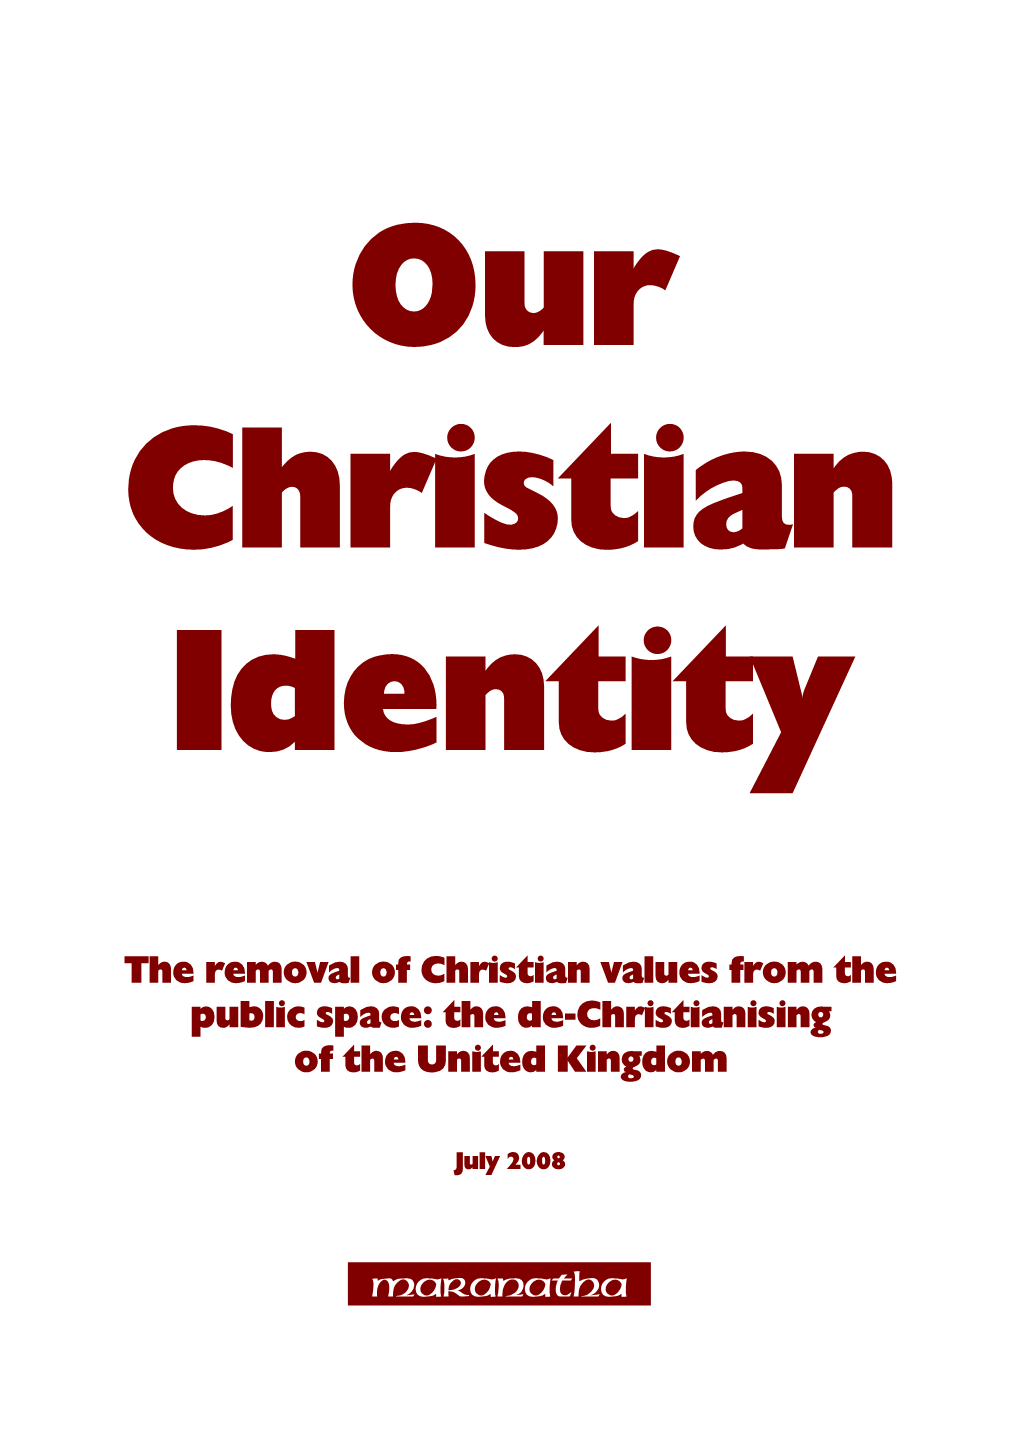 The Removal of Christian Values from the Public Space: the De-Christianising of the United Kingdom